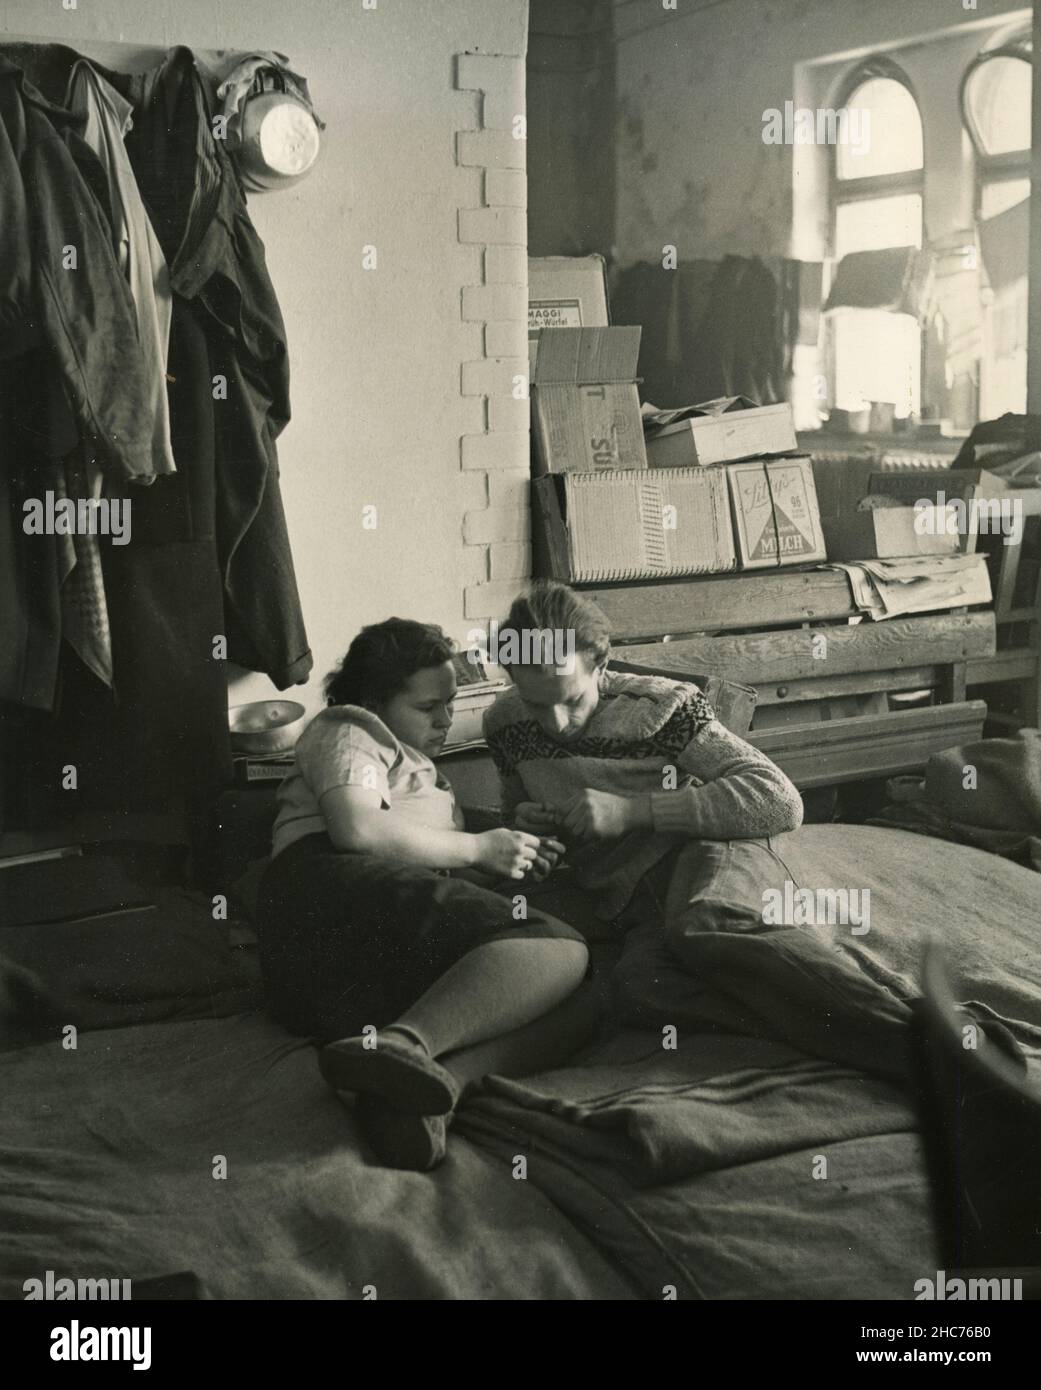 East Germans quartered at the West Berlin Refugee Camp of General Pape Strasse, Germany 1950s Stock Photo